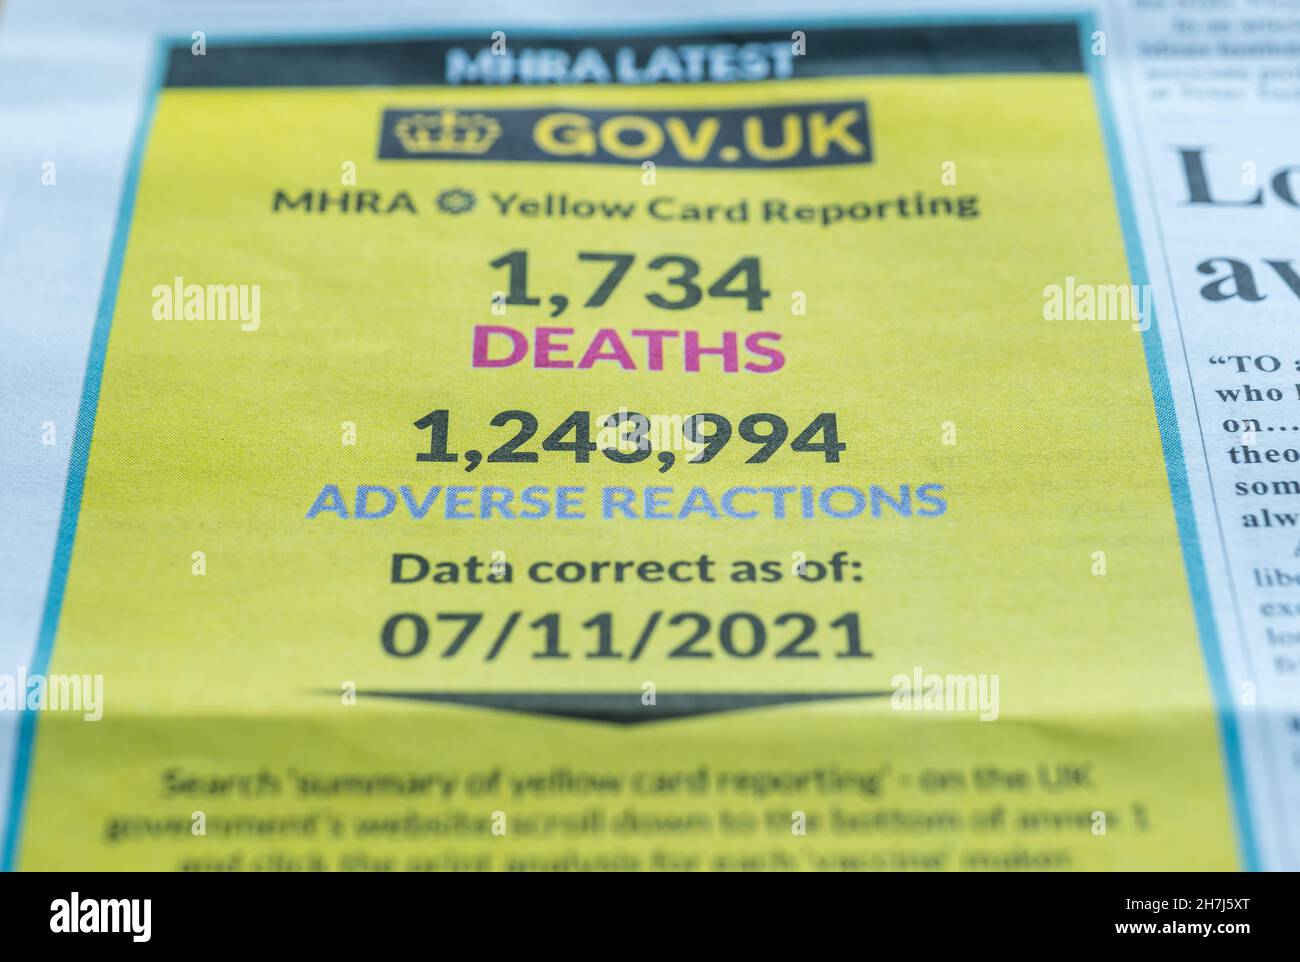 Covid anti-vaccination conspiracy theory reporting of deaths and adverse reactions in The Light free newspaper published by Darren Smith Stock Photo